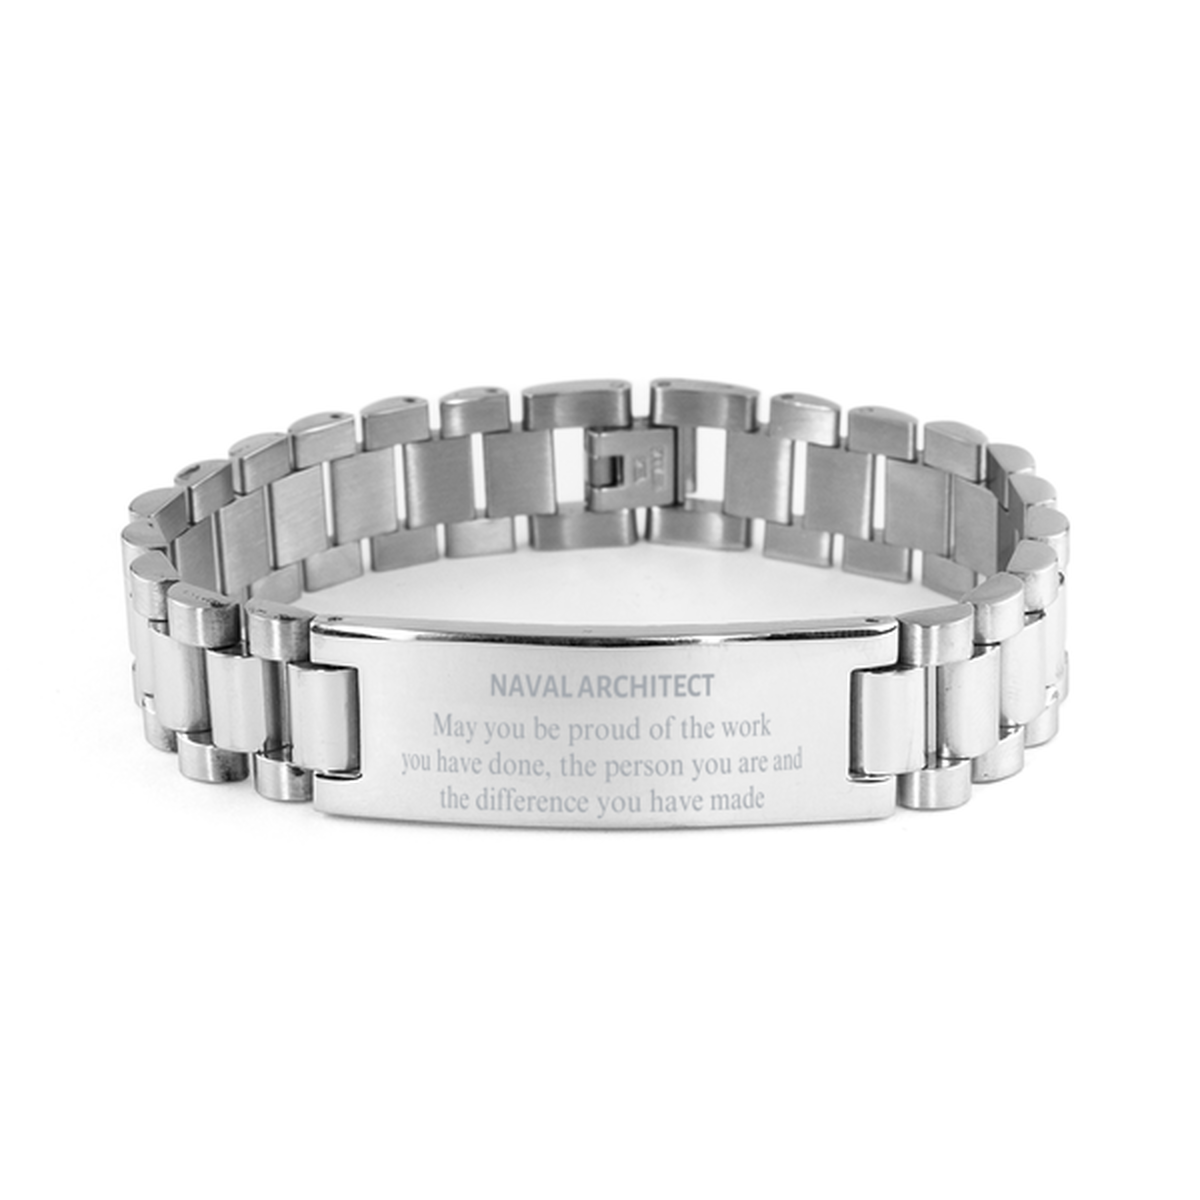 Naval Architect May you be proud of the work you have done, Retirement Naval Architect Ladder Stainless Steel Bracelet for Colleague Appreciation Gifts Amazing for Naval Architect